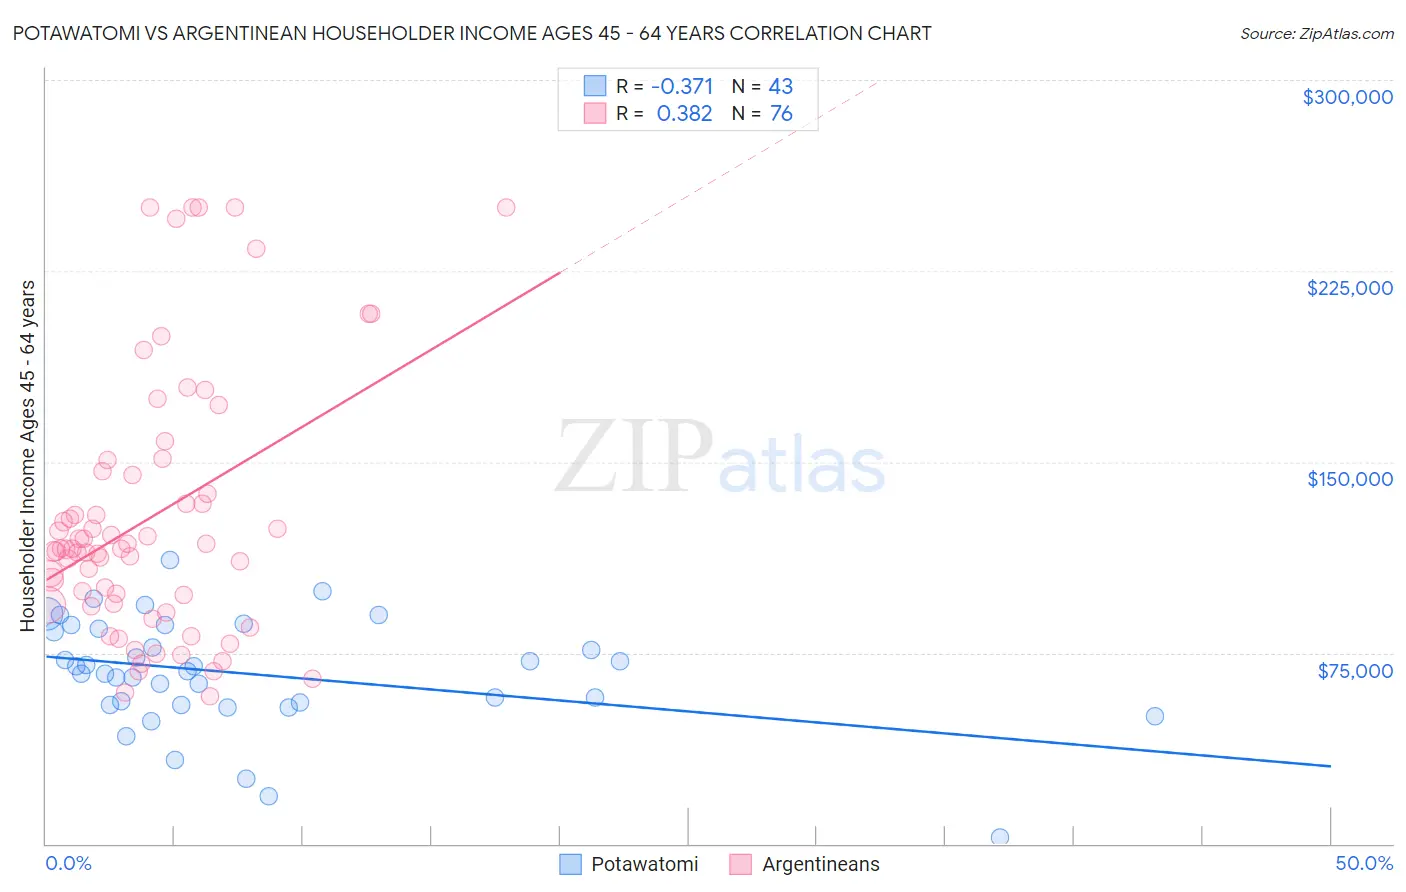 Potawatomi vs Argentinean Householder Income Ages 45 - 64 years